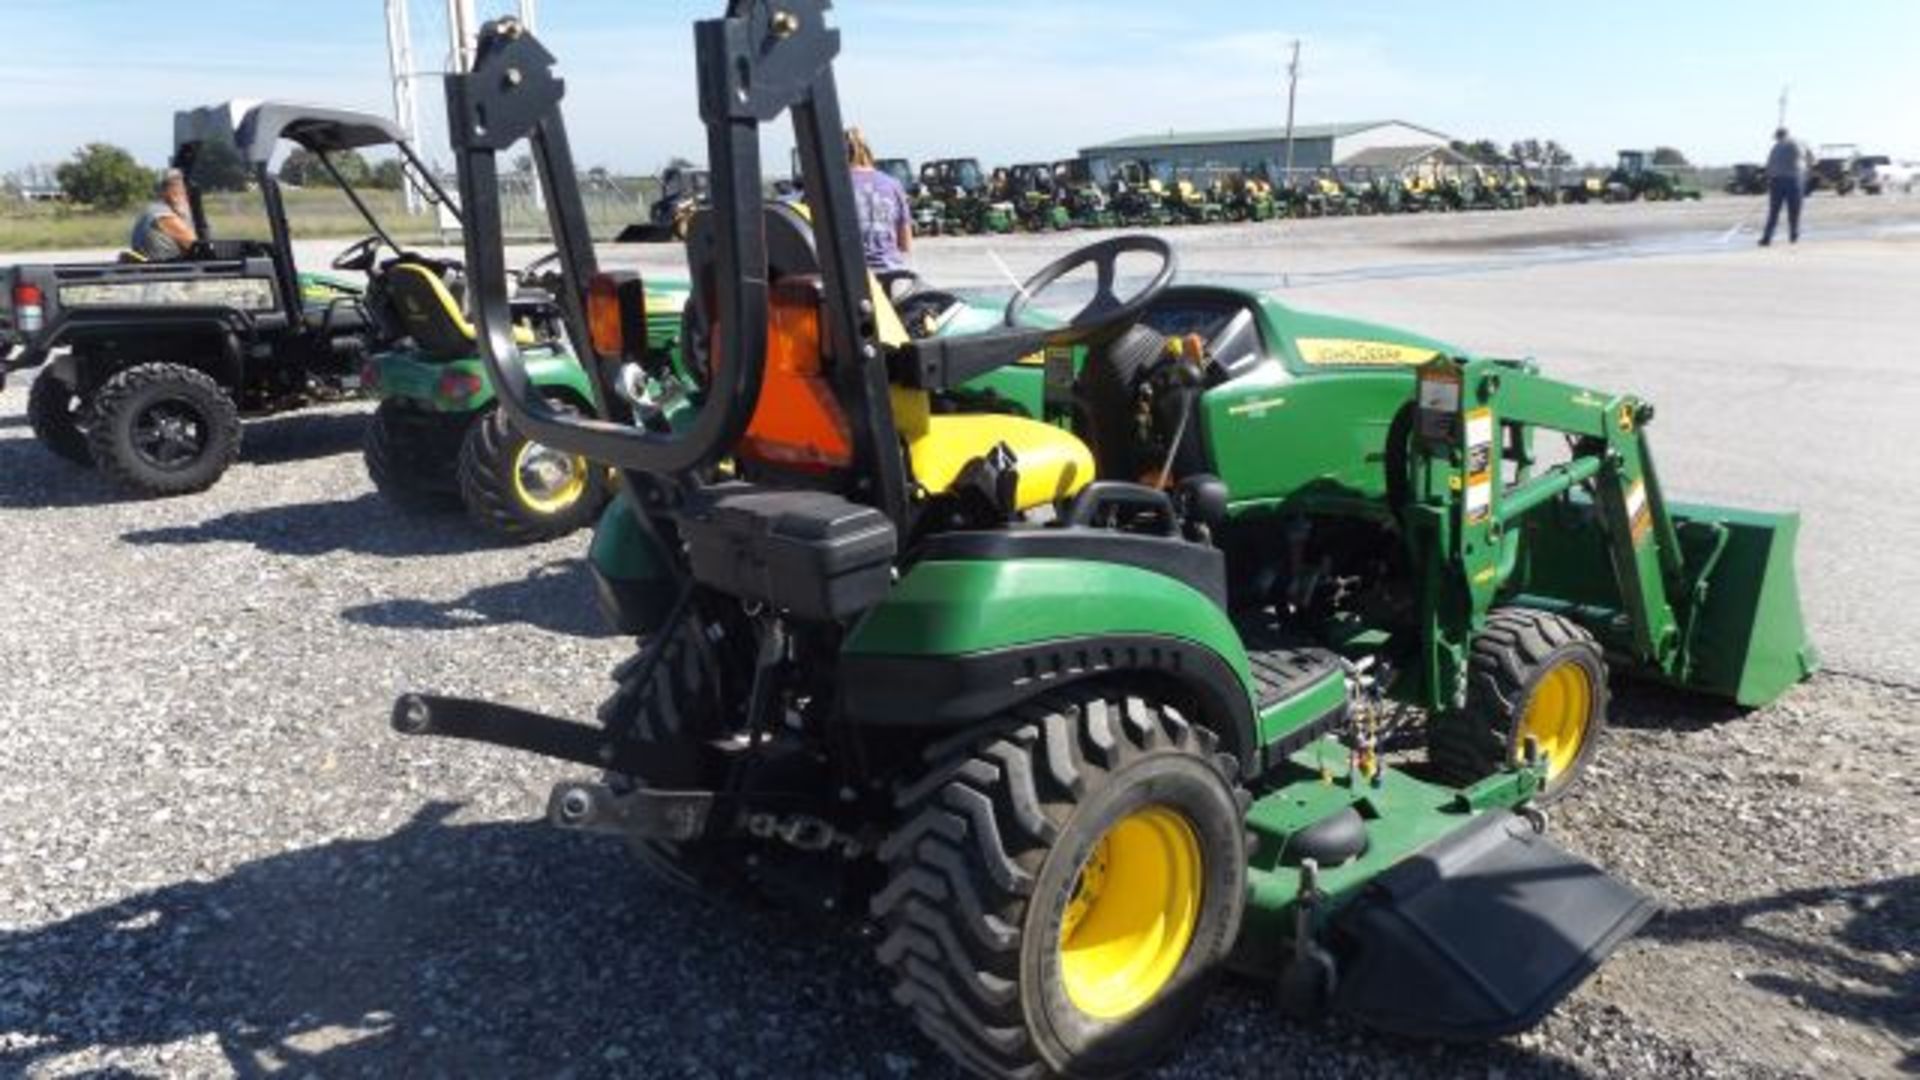 2012 JD 1026R Compact Tractor #111723, 440 hrs, MFWD, 26hp Yanmar, 2 sp Hydro, R4 Tires, CAT 1 Ltd - Image 3 of 4